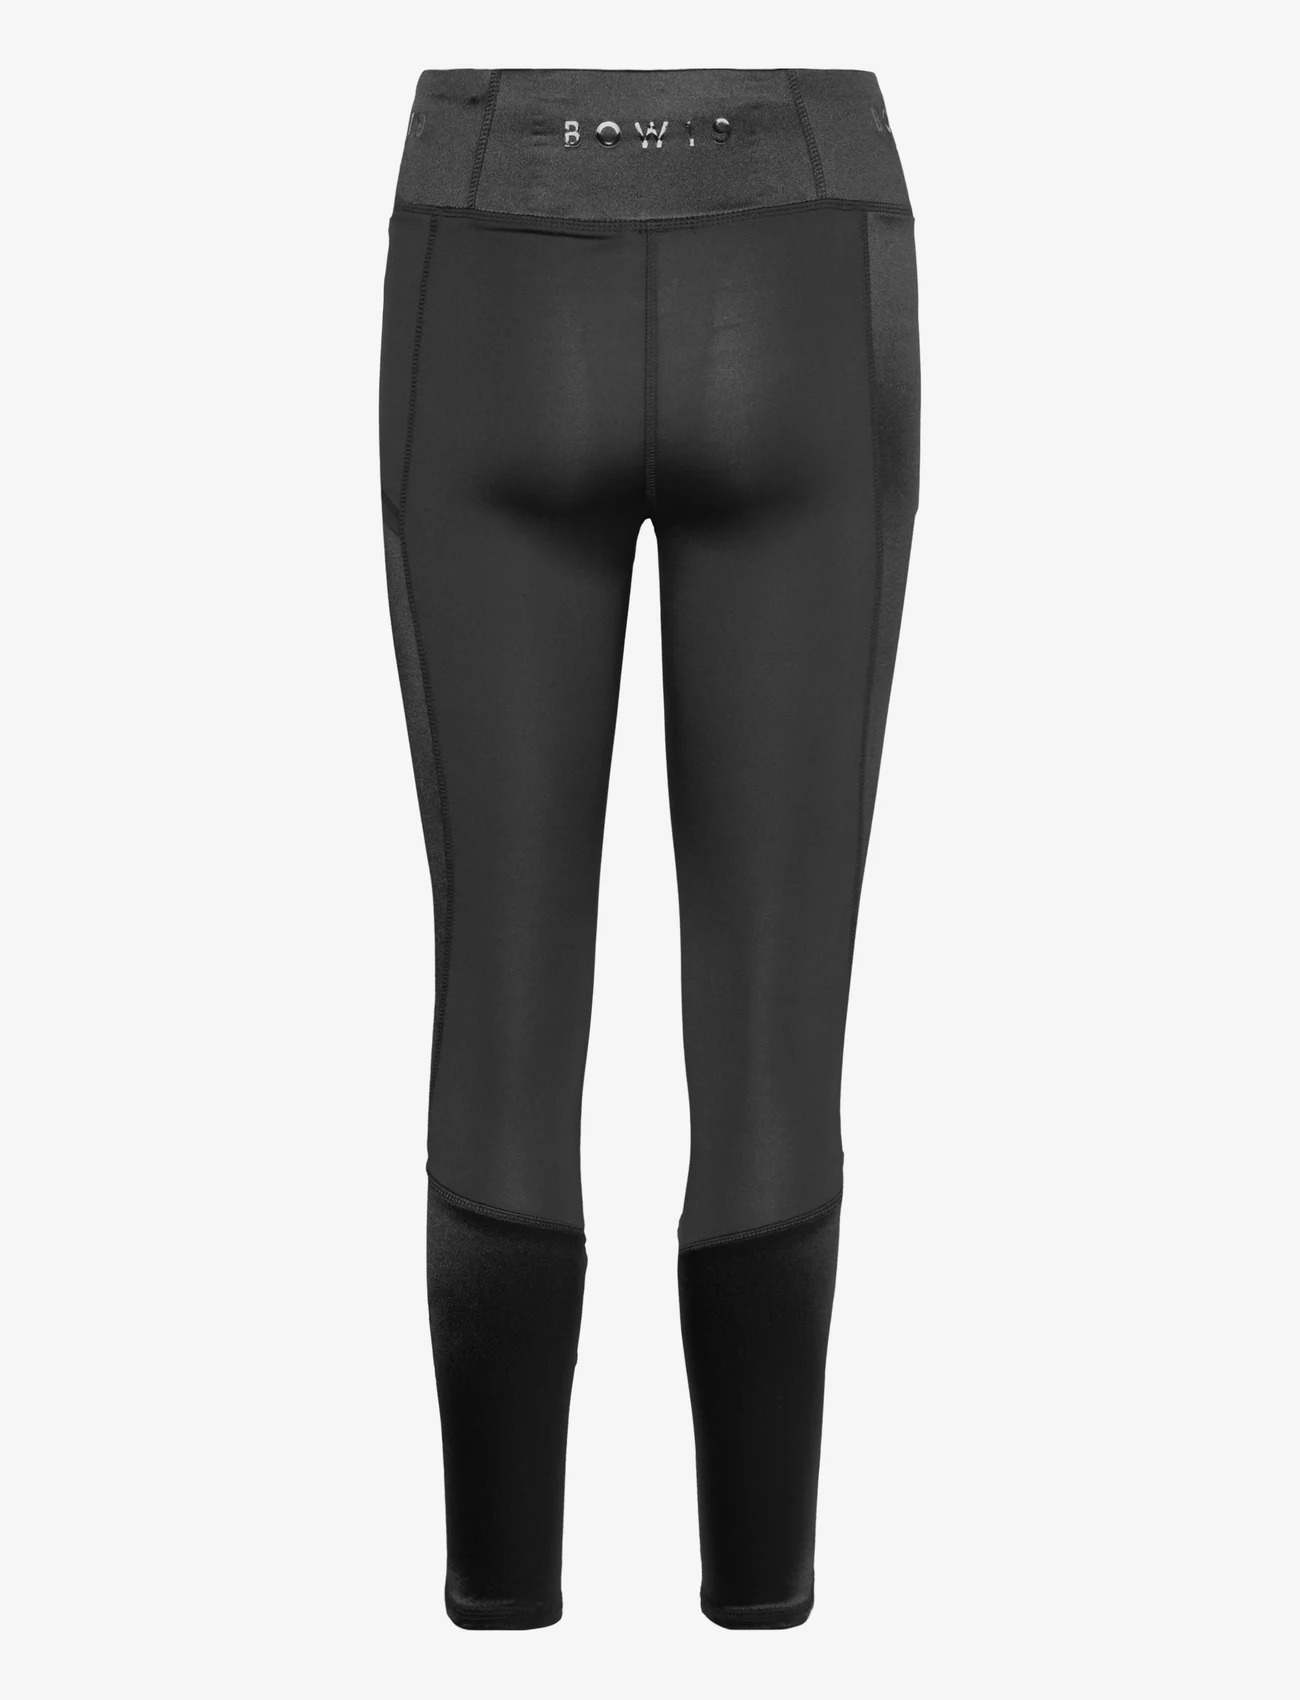 BOW19 - Angie tights - running & training tights - black - 1